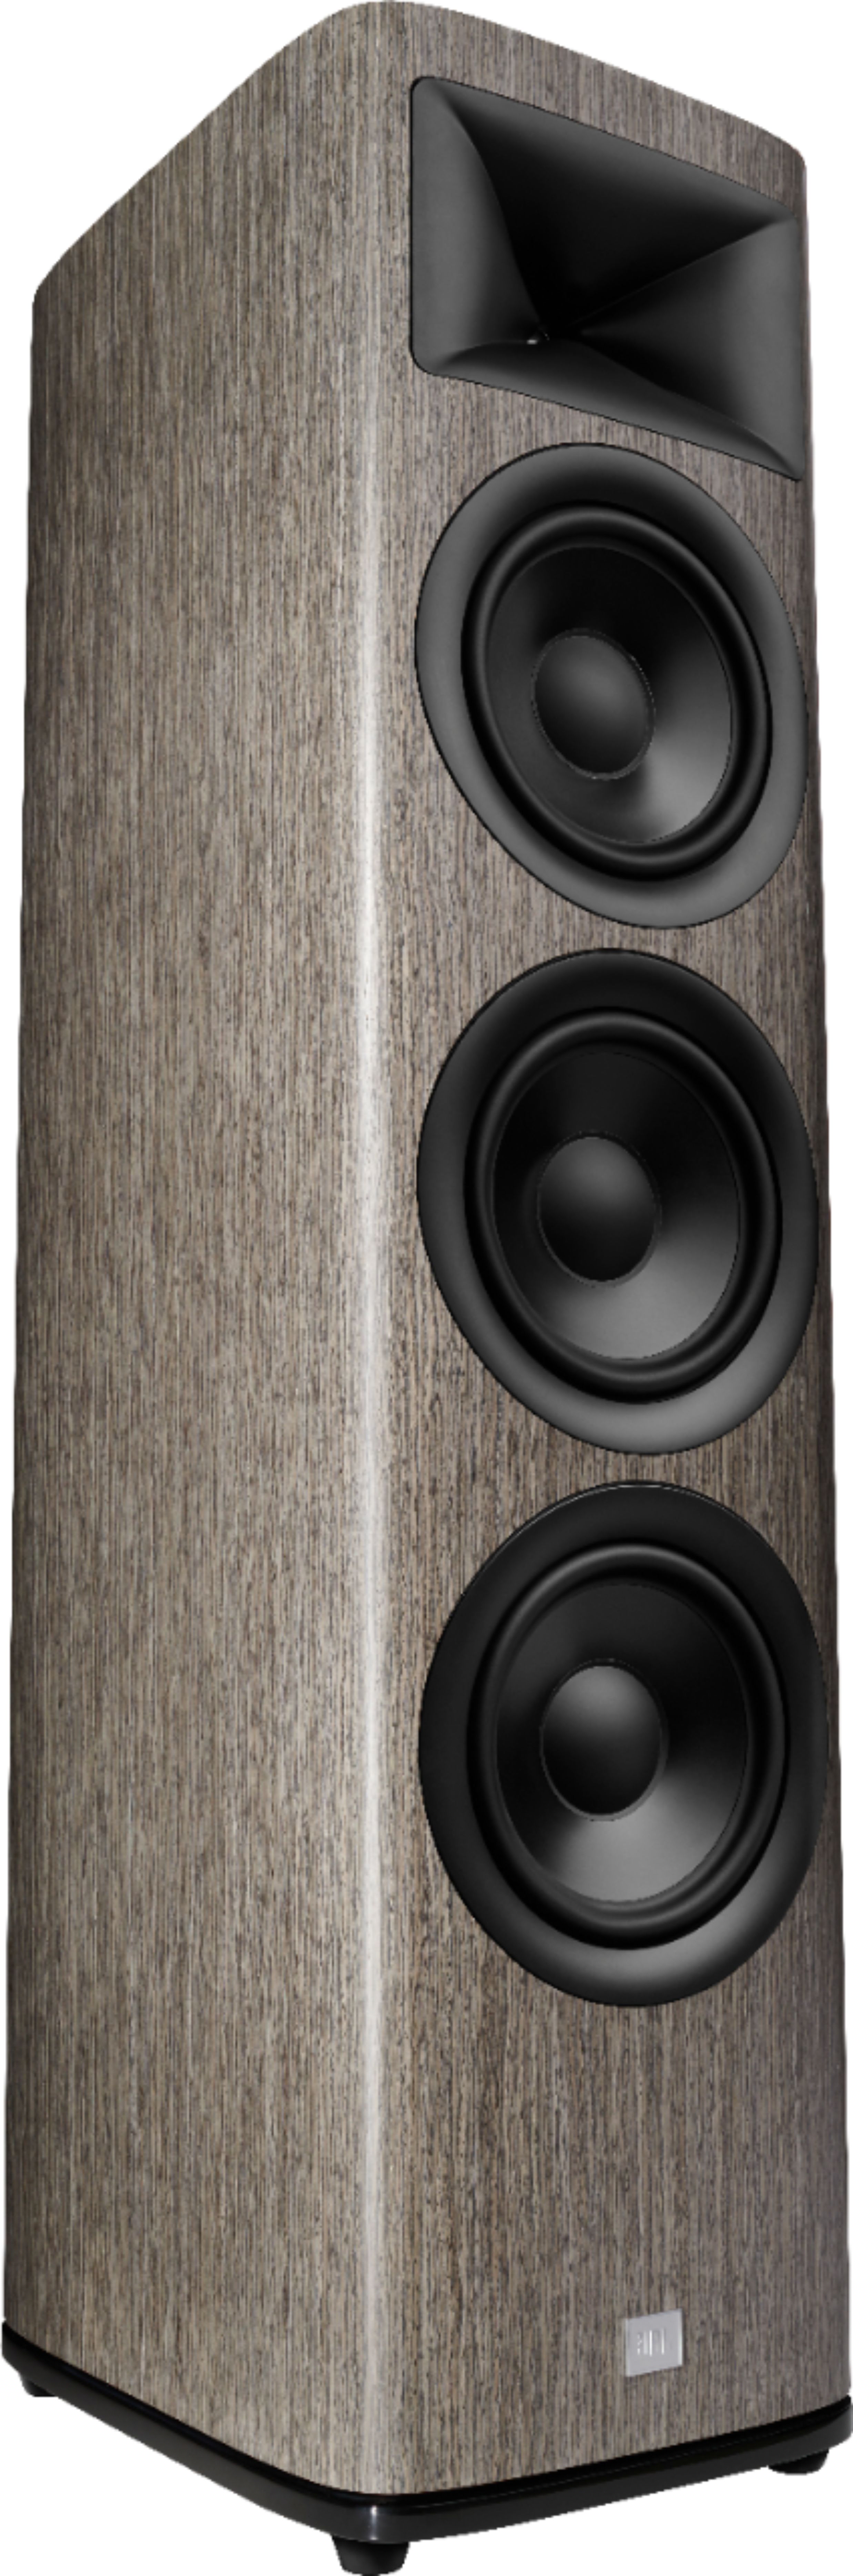 Angle View: JBL - HDI3800 Triple 8-inch 2-1/2 way Floorstanding Loudspeaker with 1" compression tweeter - Gray Oak Finish